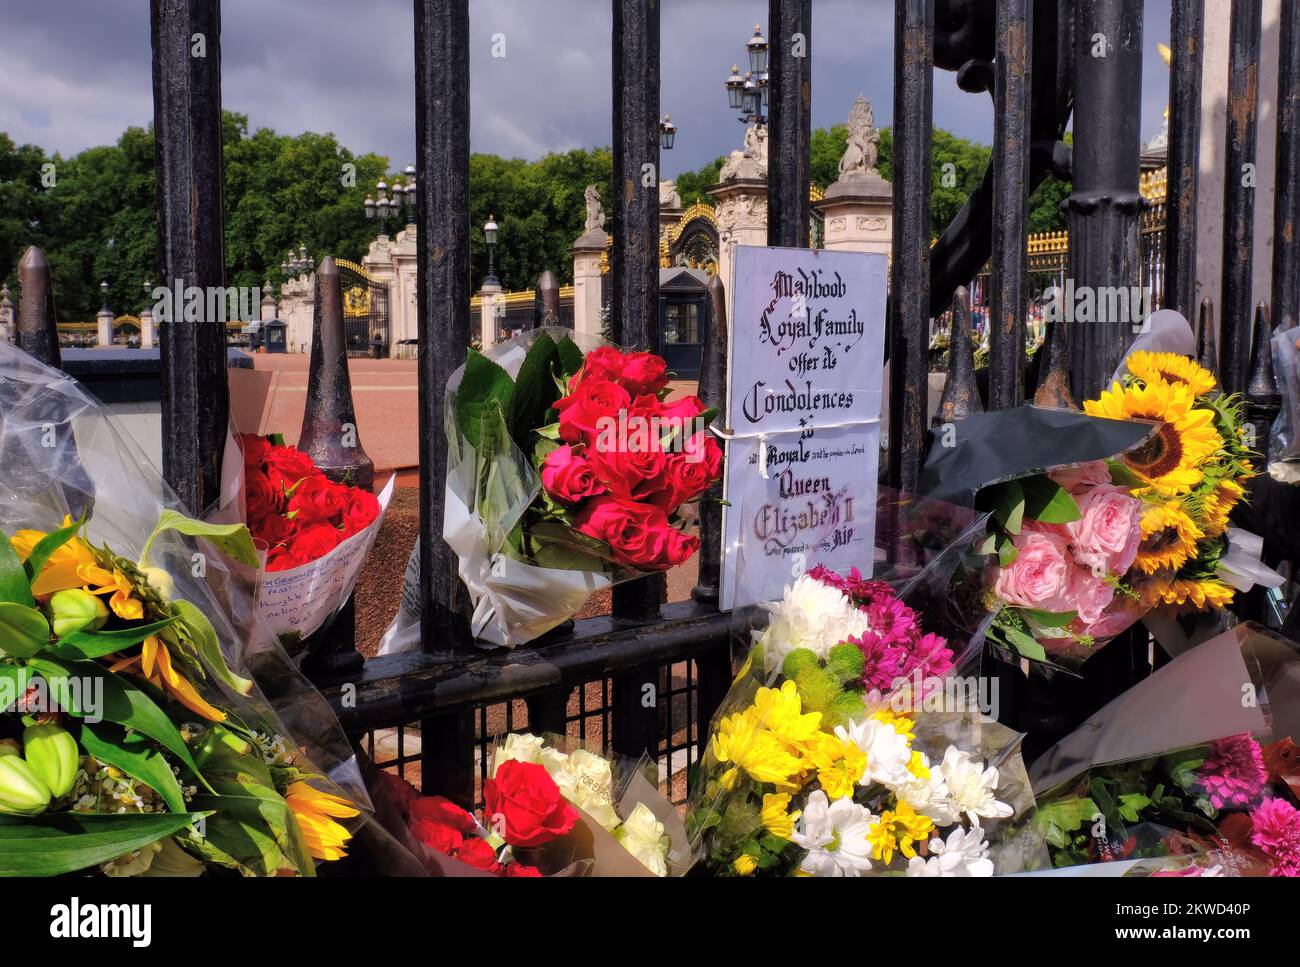 Queen Elizabeth II death: Floral tributes and messages outside Buckingham Palace on morning after her death, London, England Stock Photo